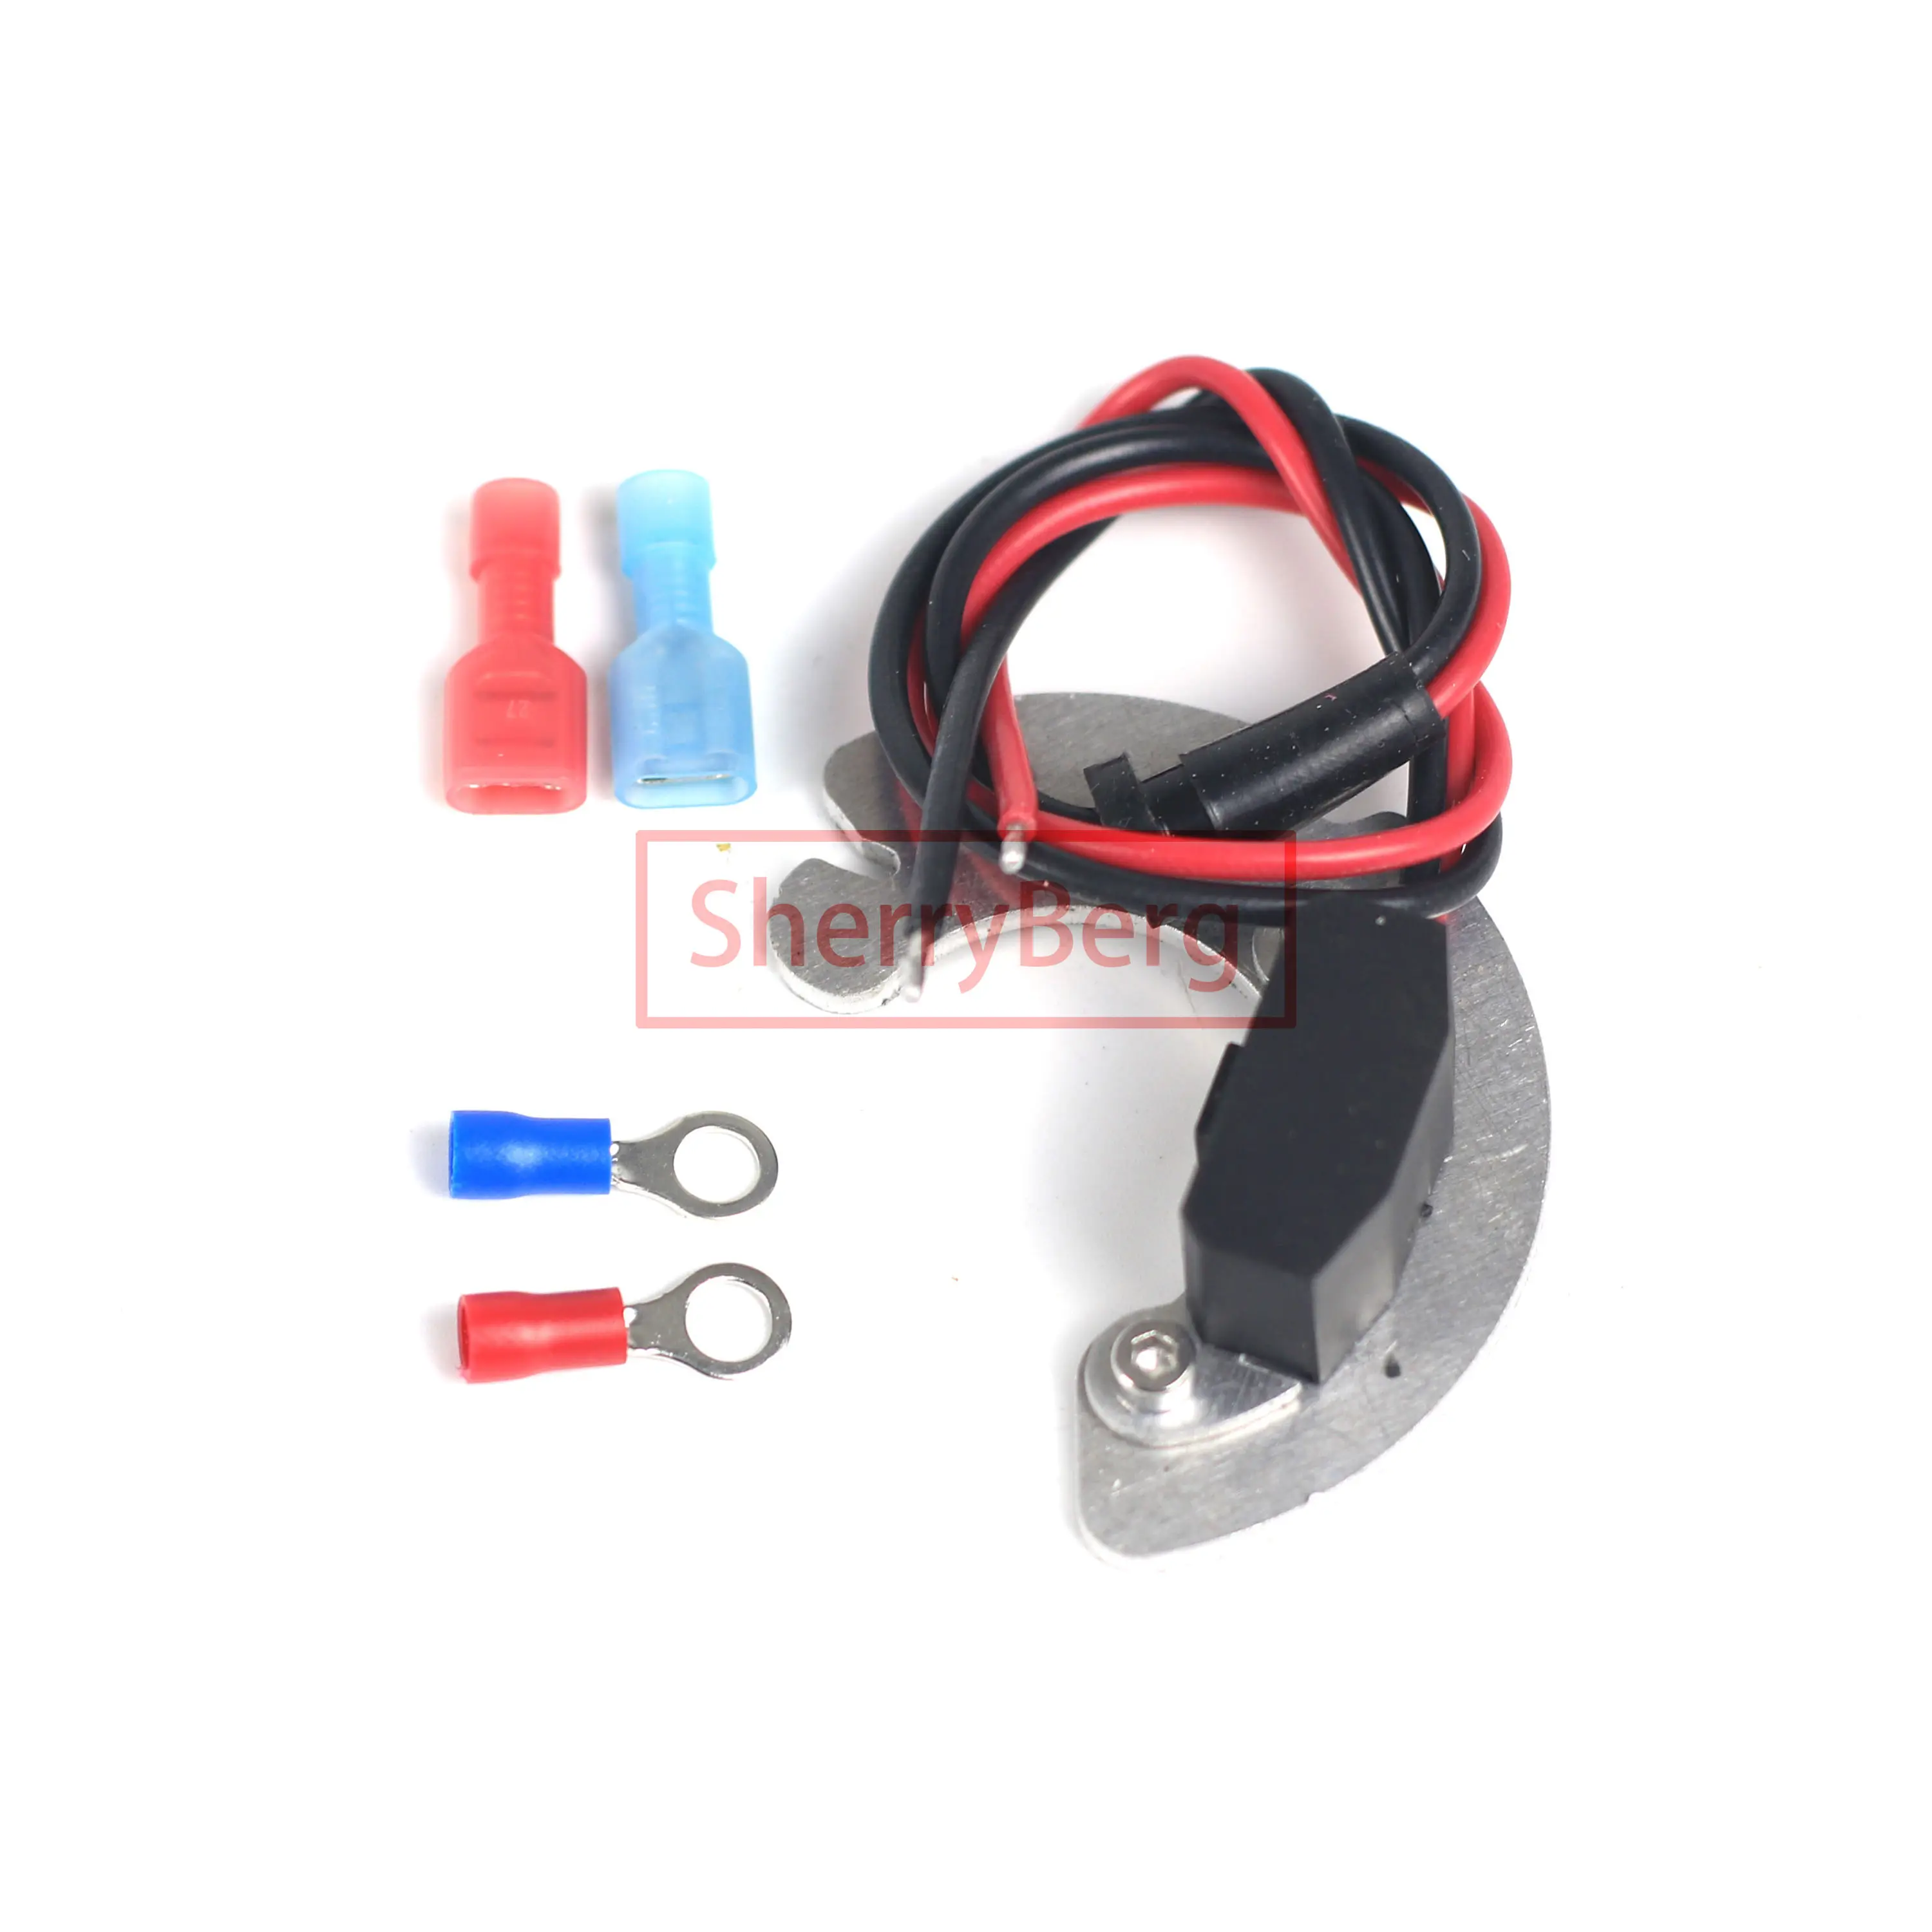 SherryBerg New Electrical Ignition 4-cyl for ELECTRONIC IGNITION KIT for FIAT 127 (1971 1972 1973 1974 1975 1976 1977)